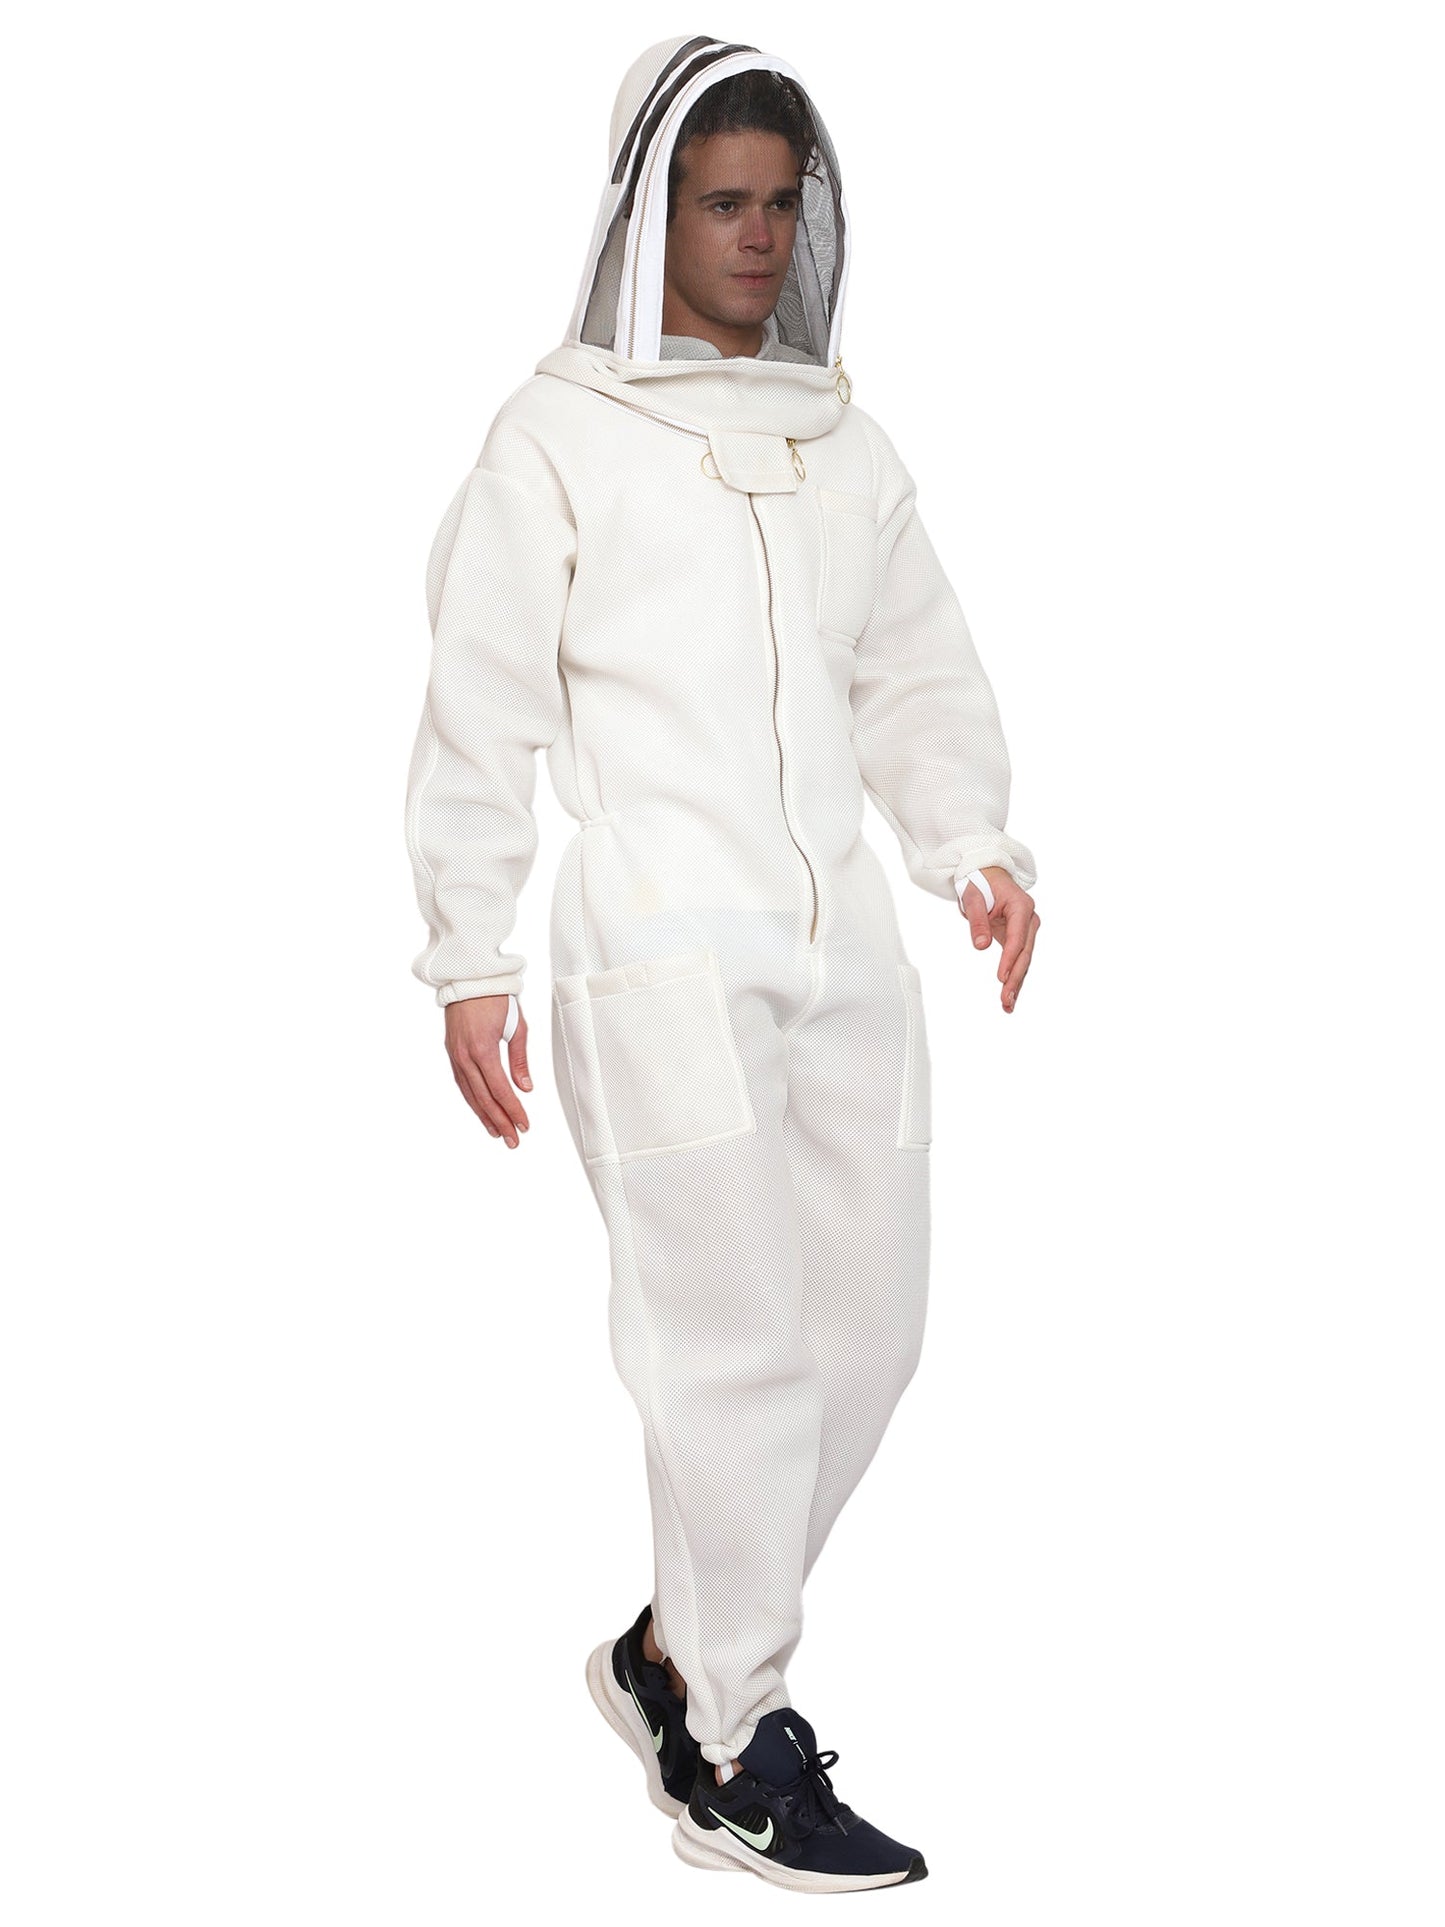 Beeattire Airmesh Bee Suit with Easy Access Veil - Ventilated Bee Suit For Men